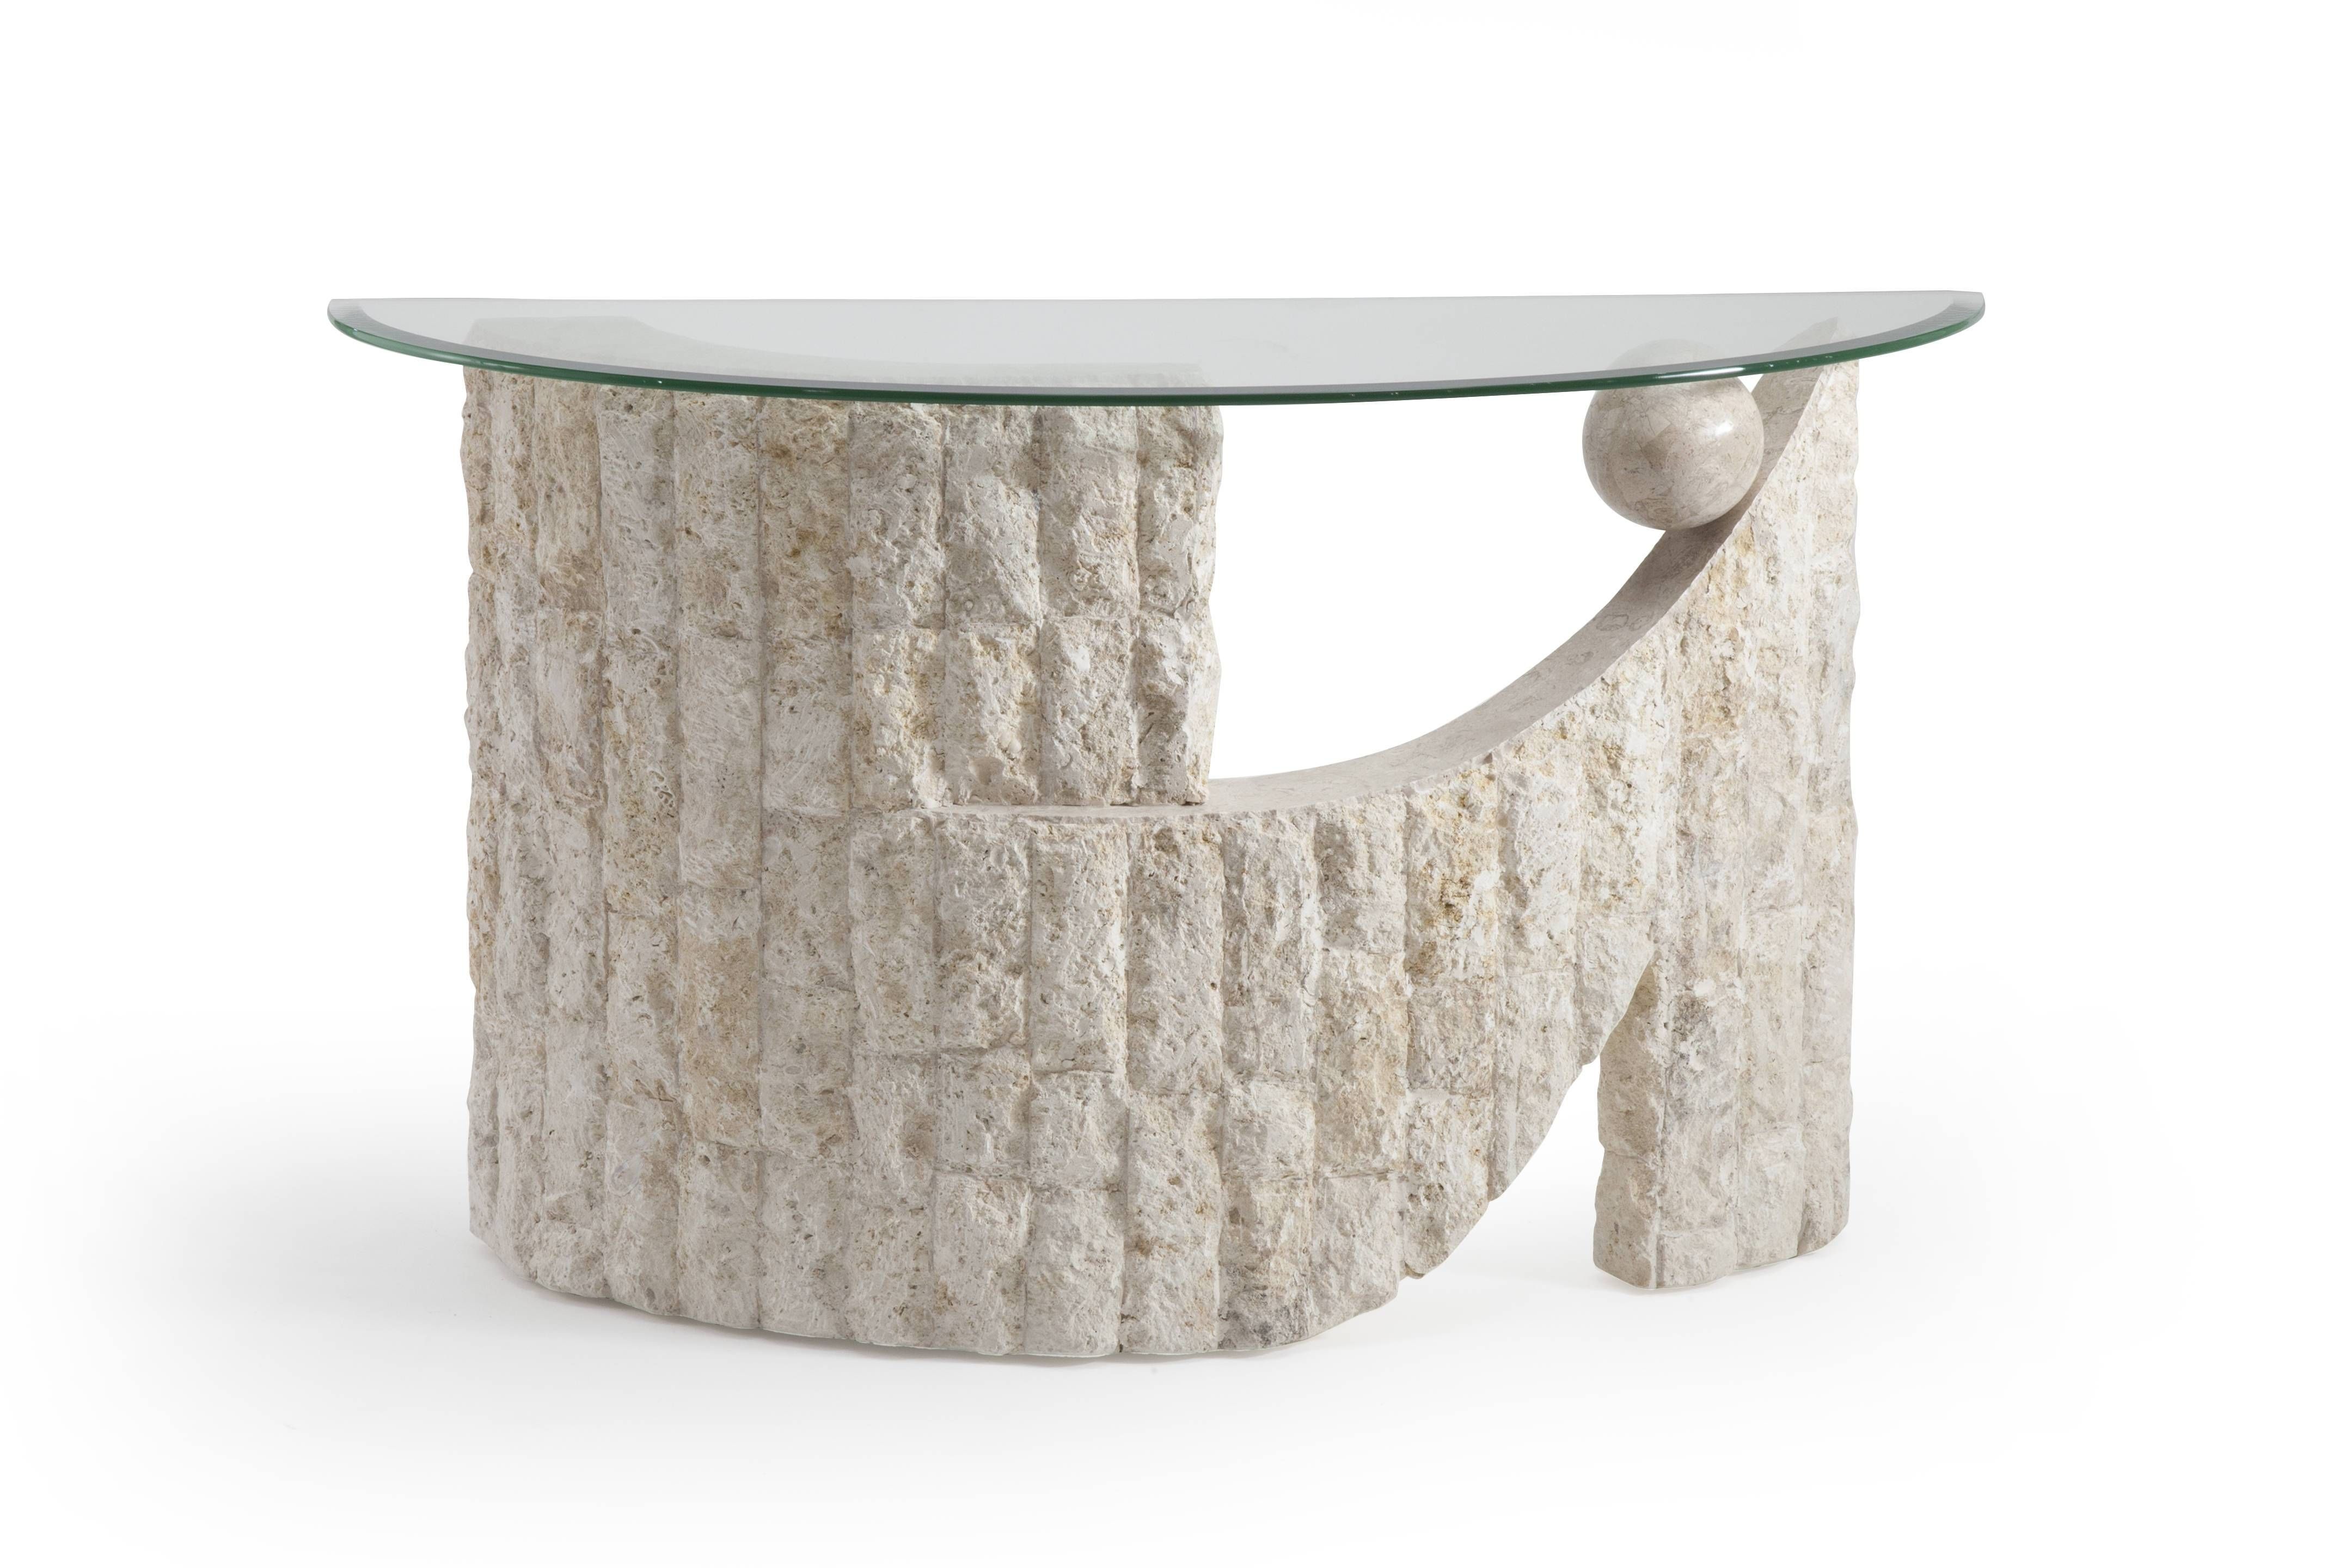 Ponte Vedra Opulence Natural Mactan Stone Glass Sofa Table With Regard To Stone And Glass Coffee Tables (View 7 of 15)